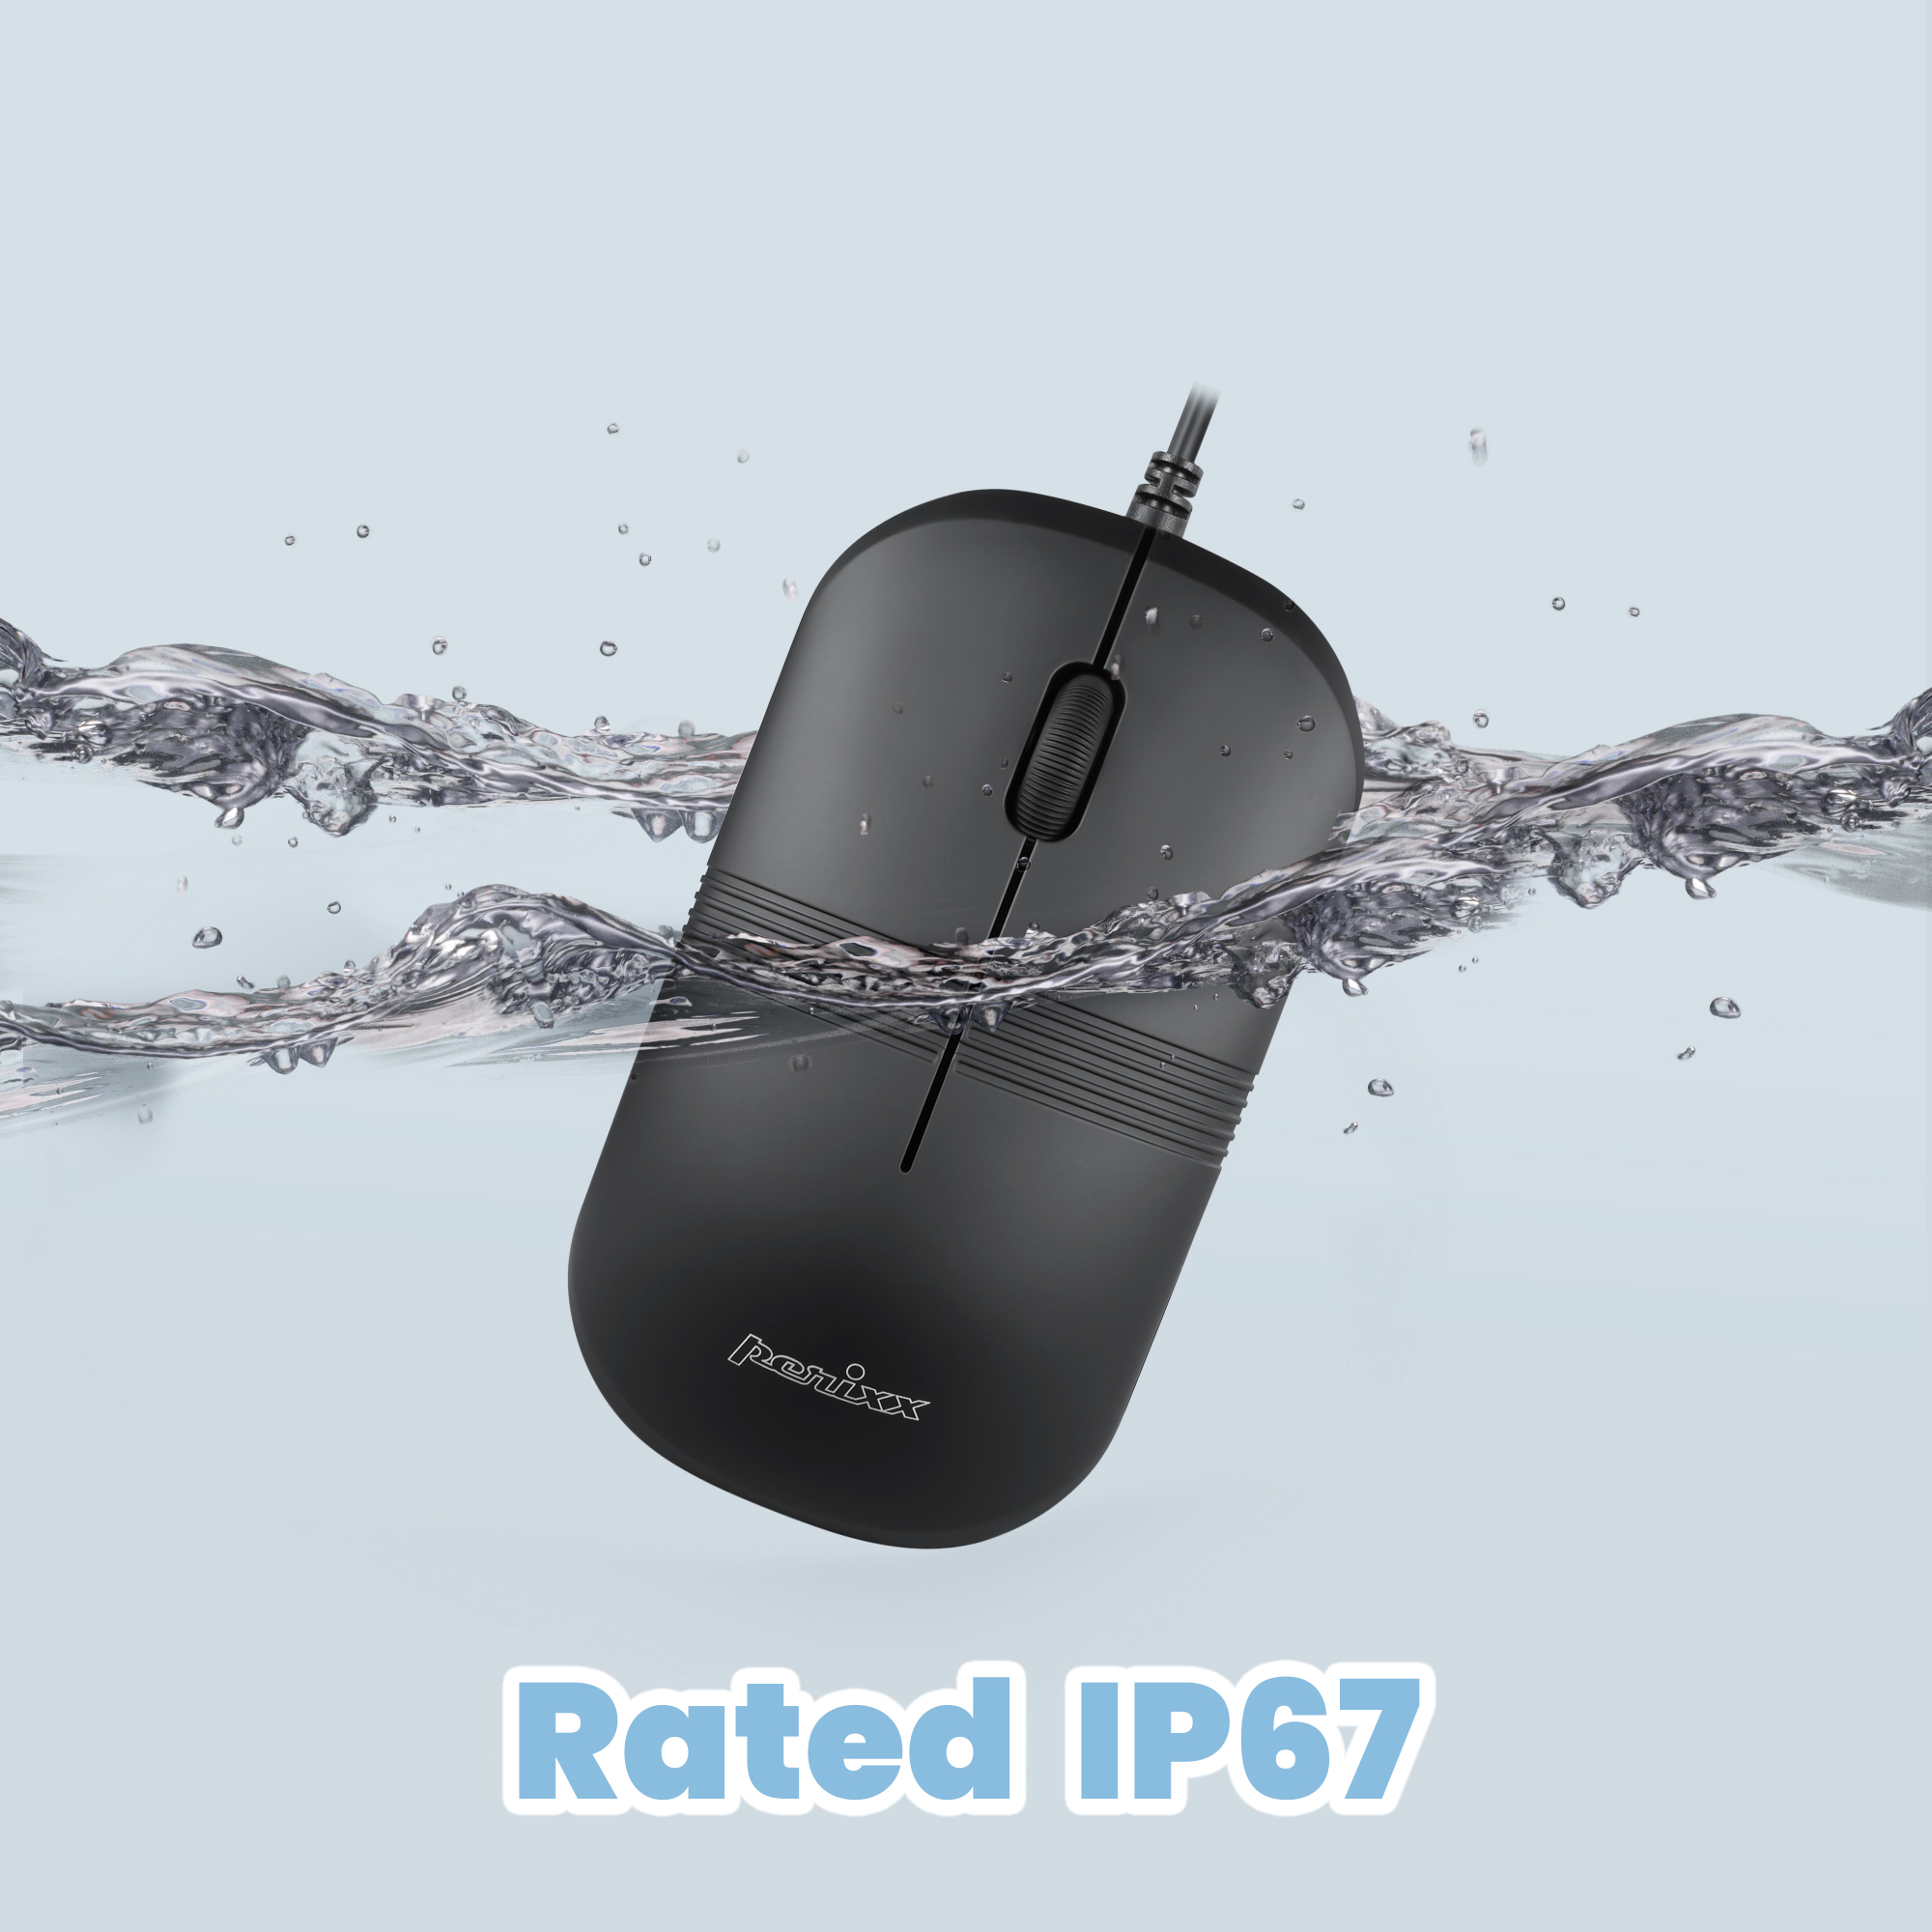 Durable and Rated IP67